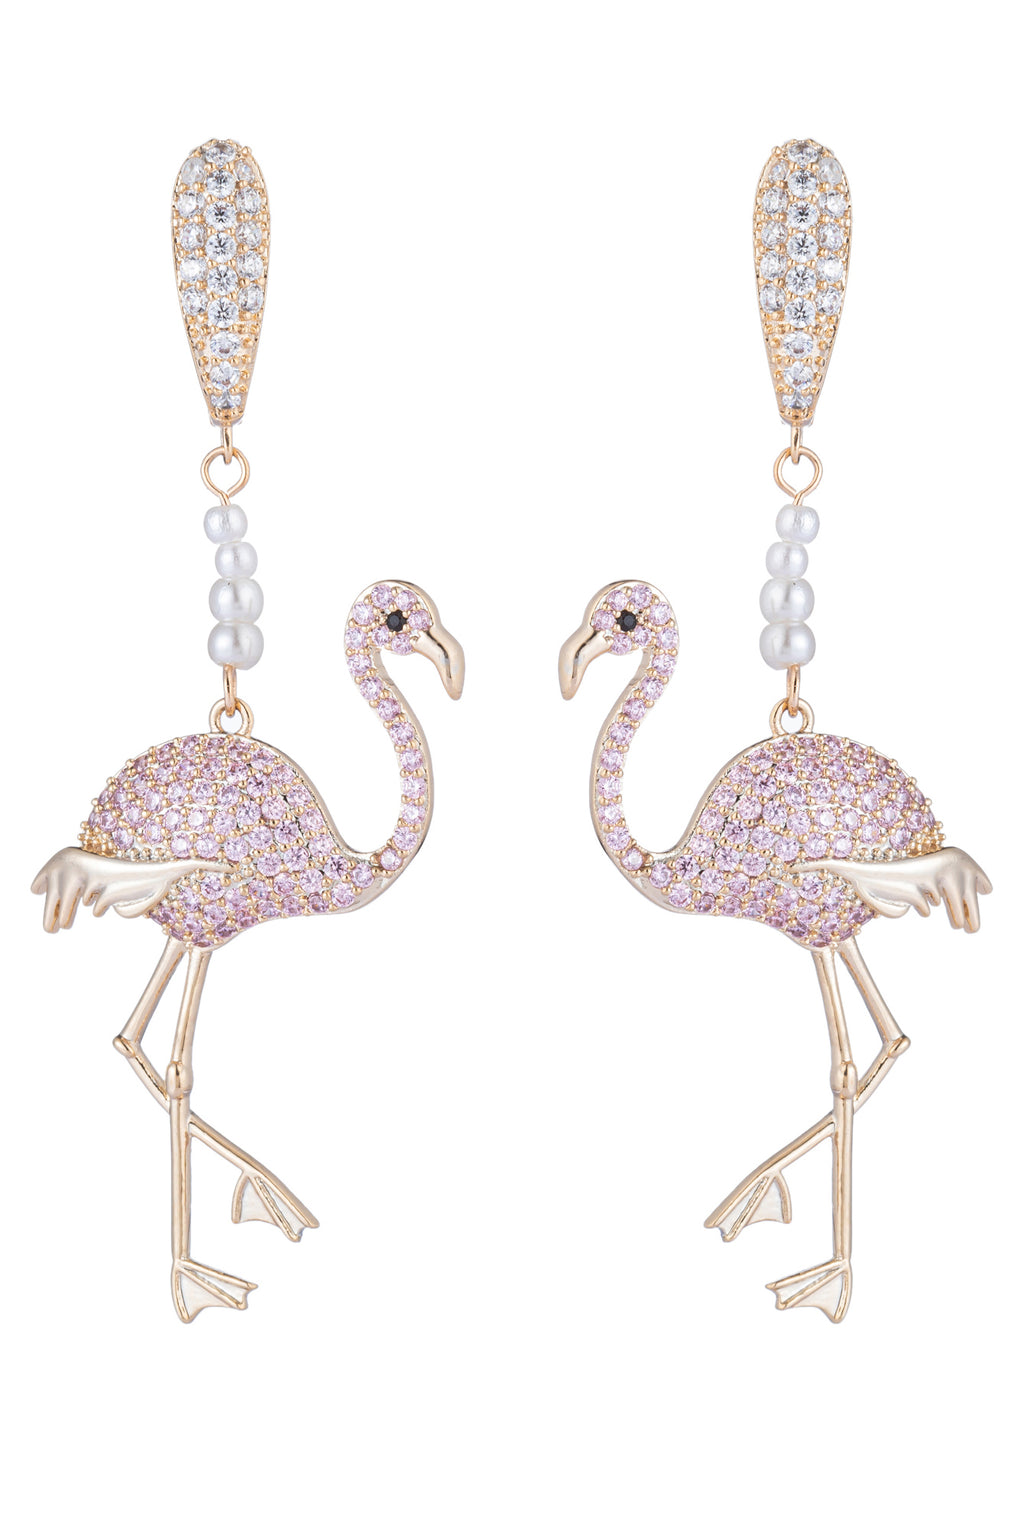 Pink flamingo bird earrings with CZ glass pearls.